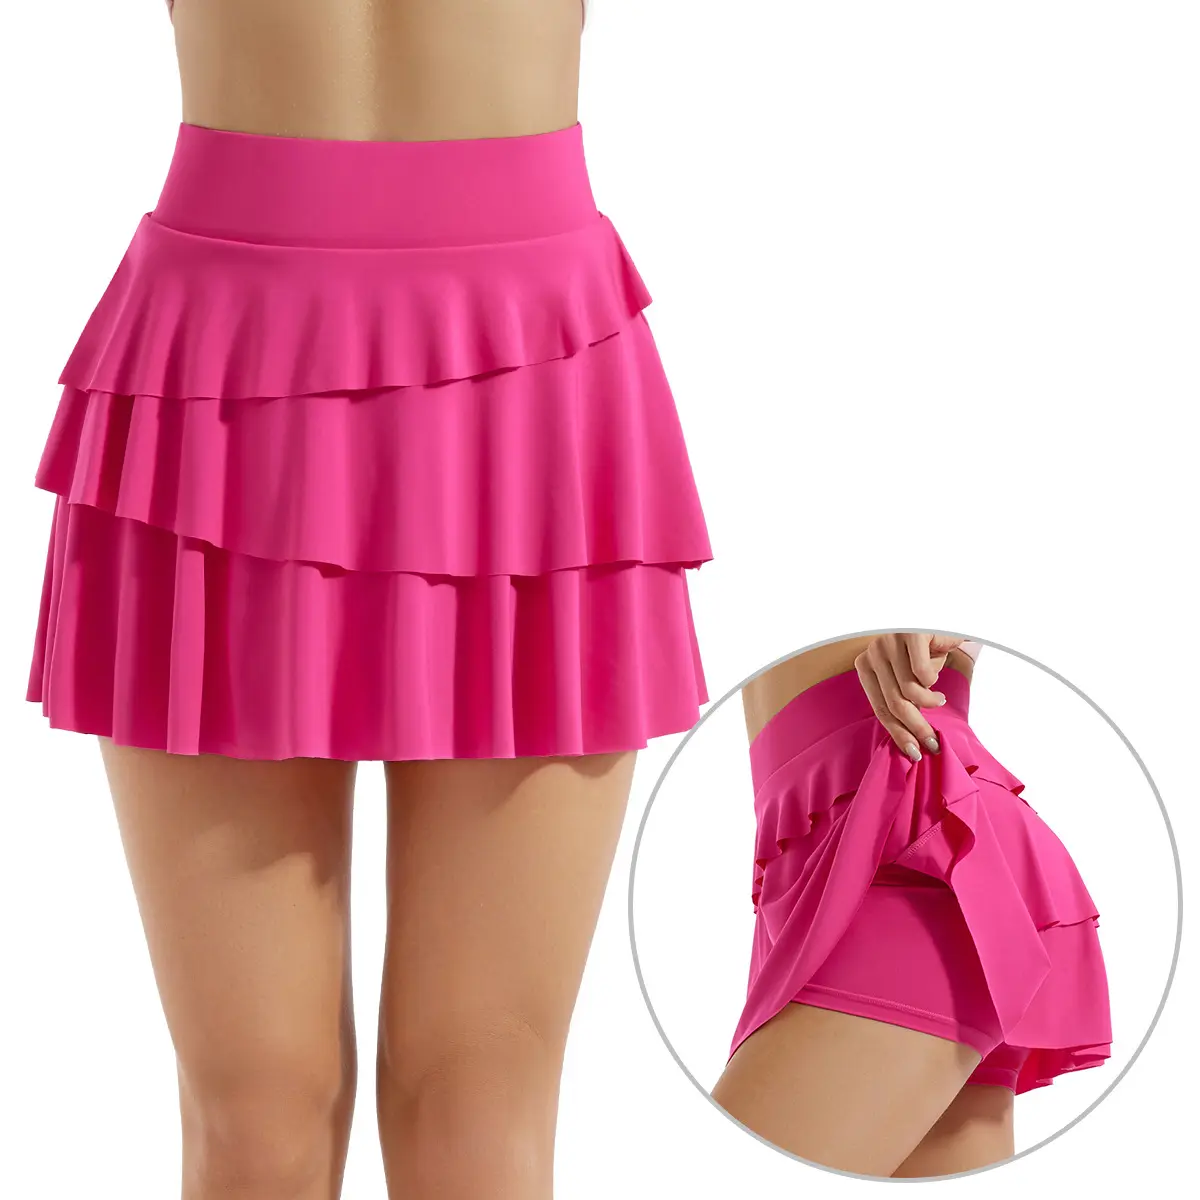 New Arrival Women Sports Skirts Cake Pleated Double Layer Shorts Quick Drying Skin Friendly Breathable Yoga Tennis Skirts